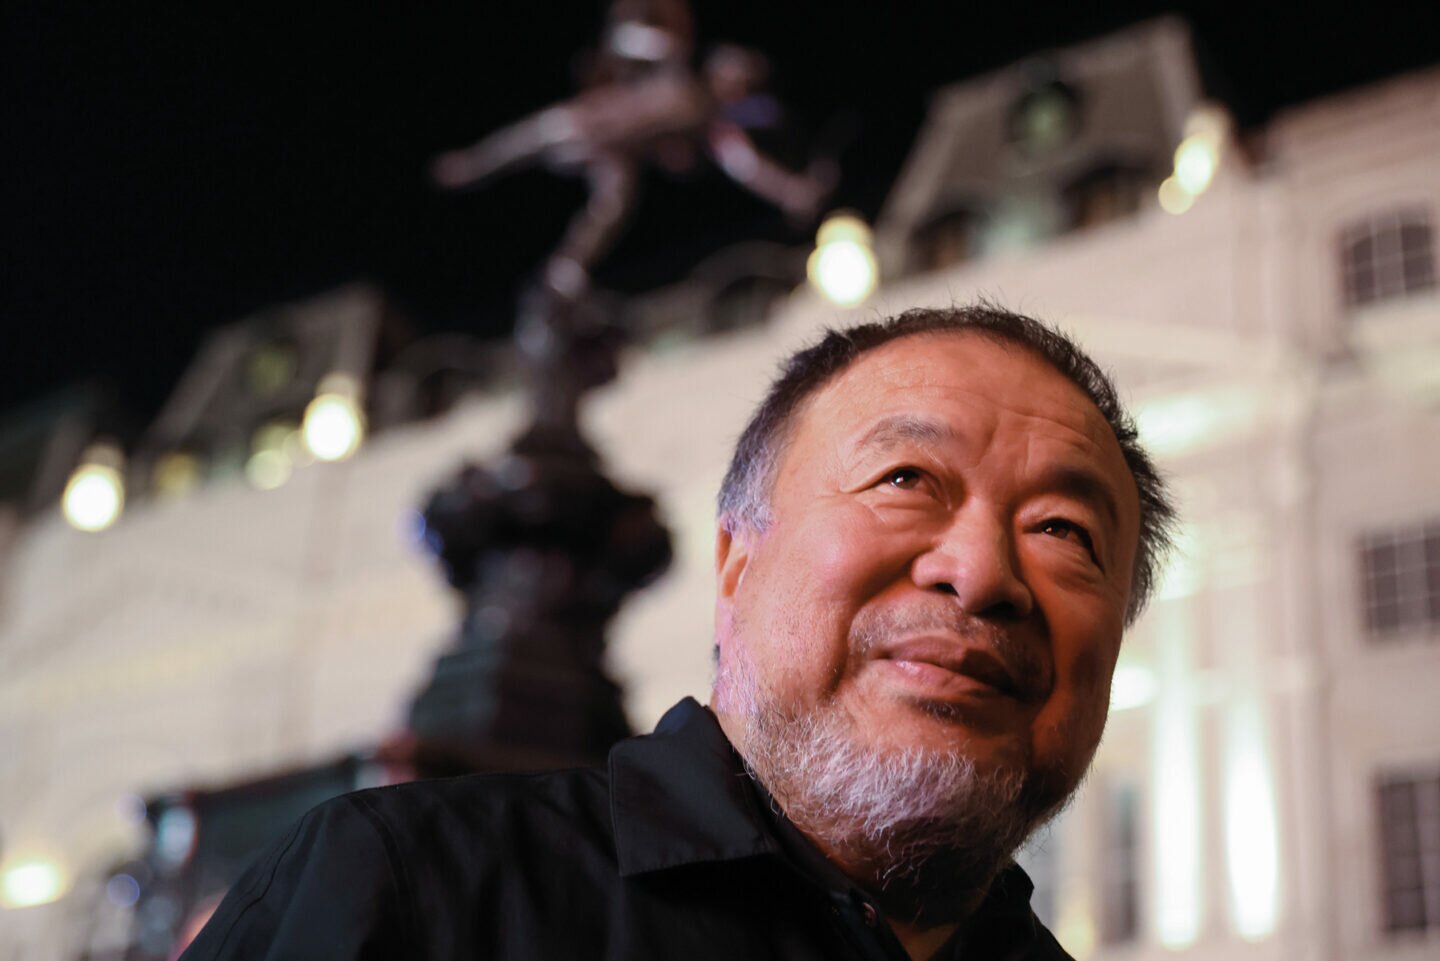 Interview: Exiled Artist Ai Weiwei Reflects On His Book Burning Past